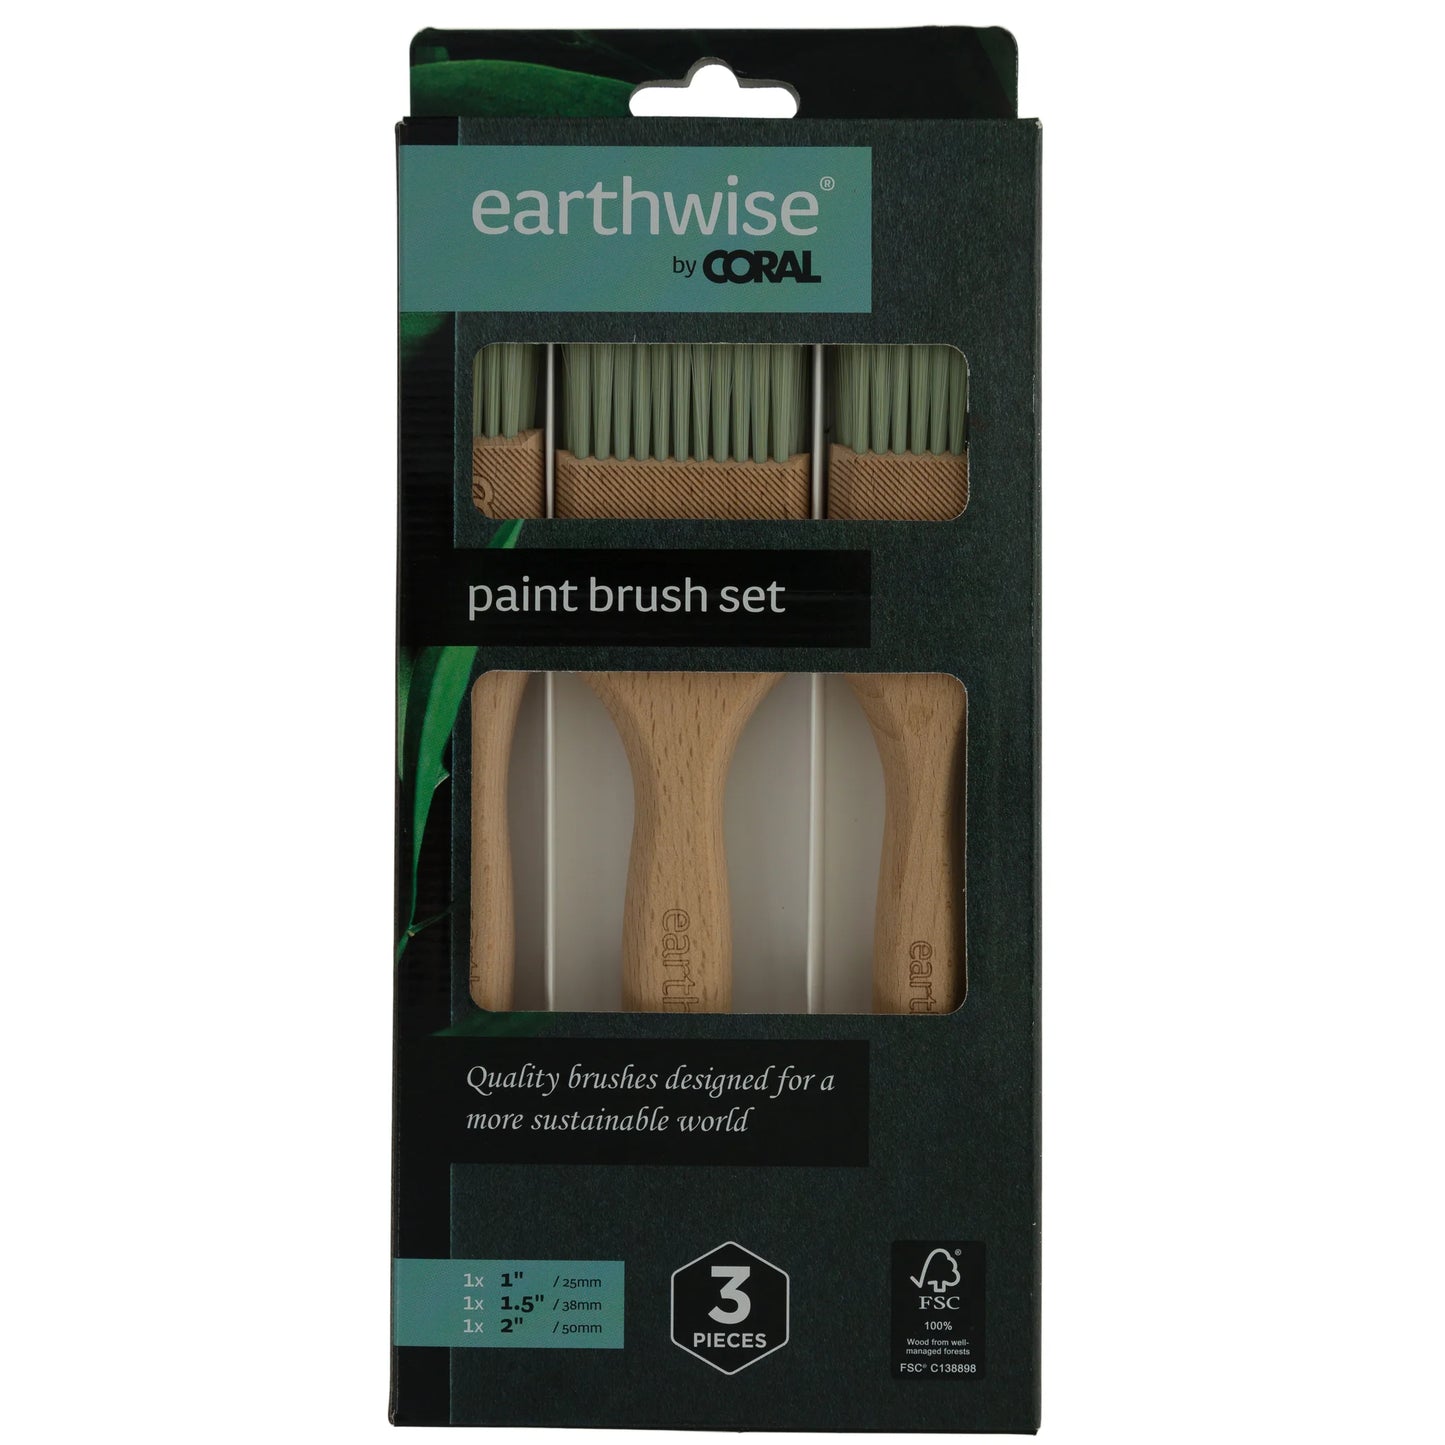 Earthwise Paint Brush set by Coral, 3 piece